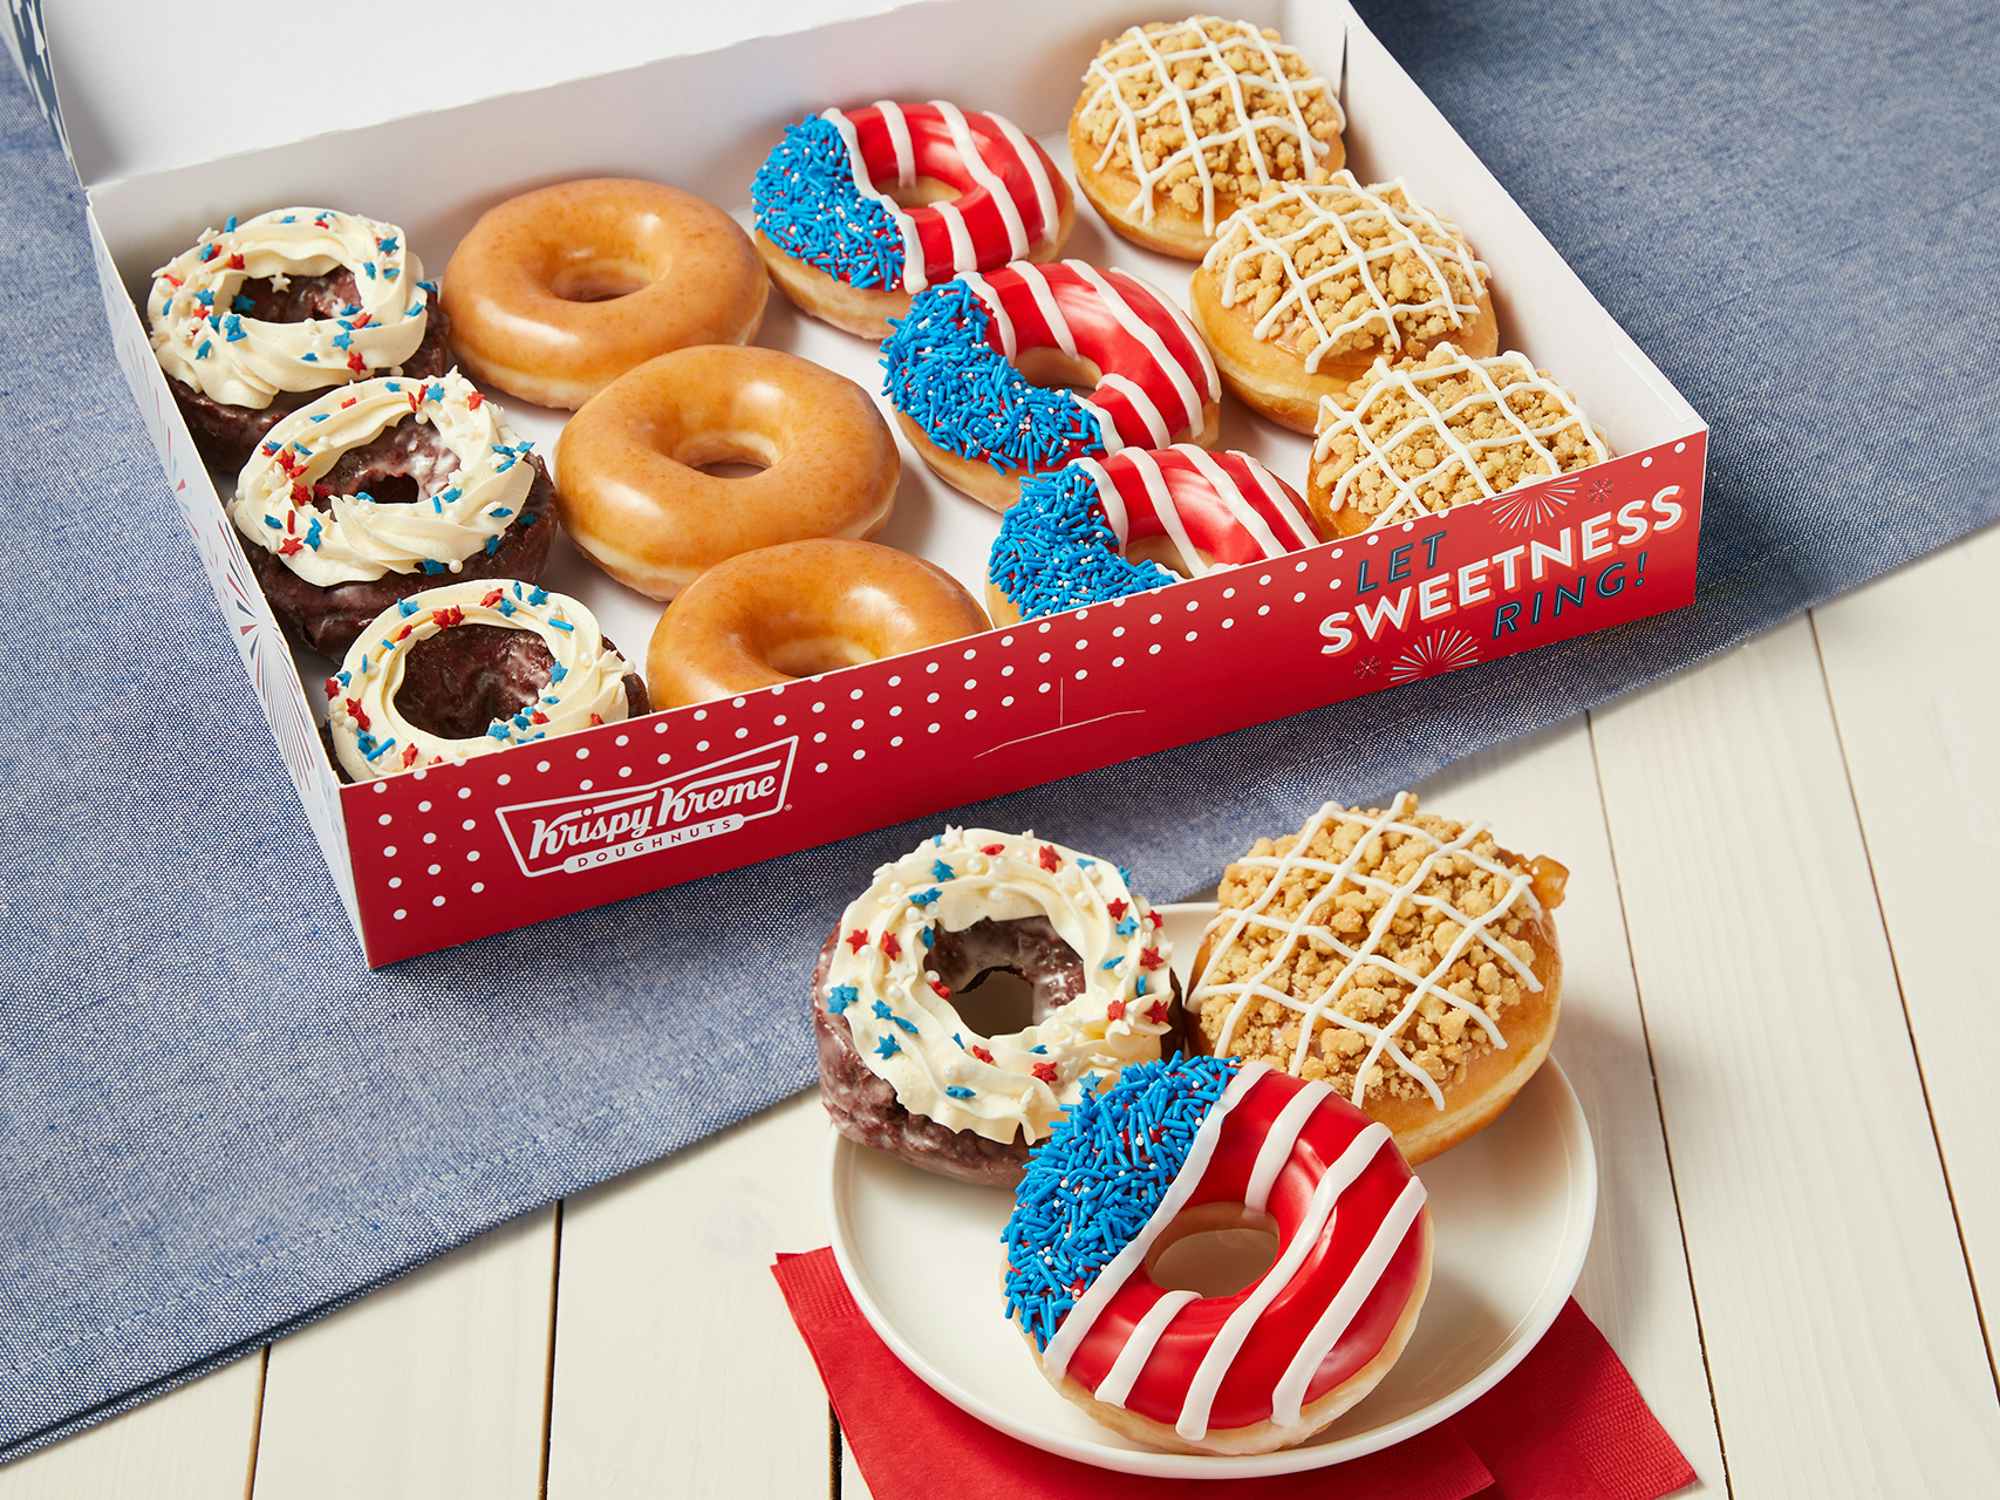 Red, White, and Blue themed doughnuts from Krispy Kreme in a box and on a plate